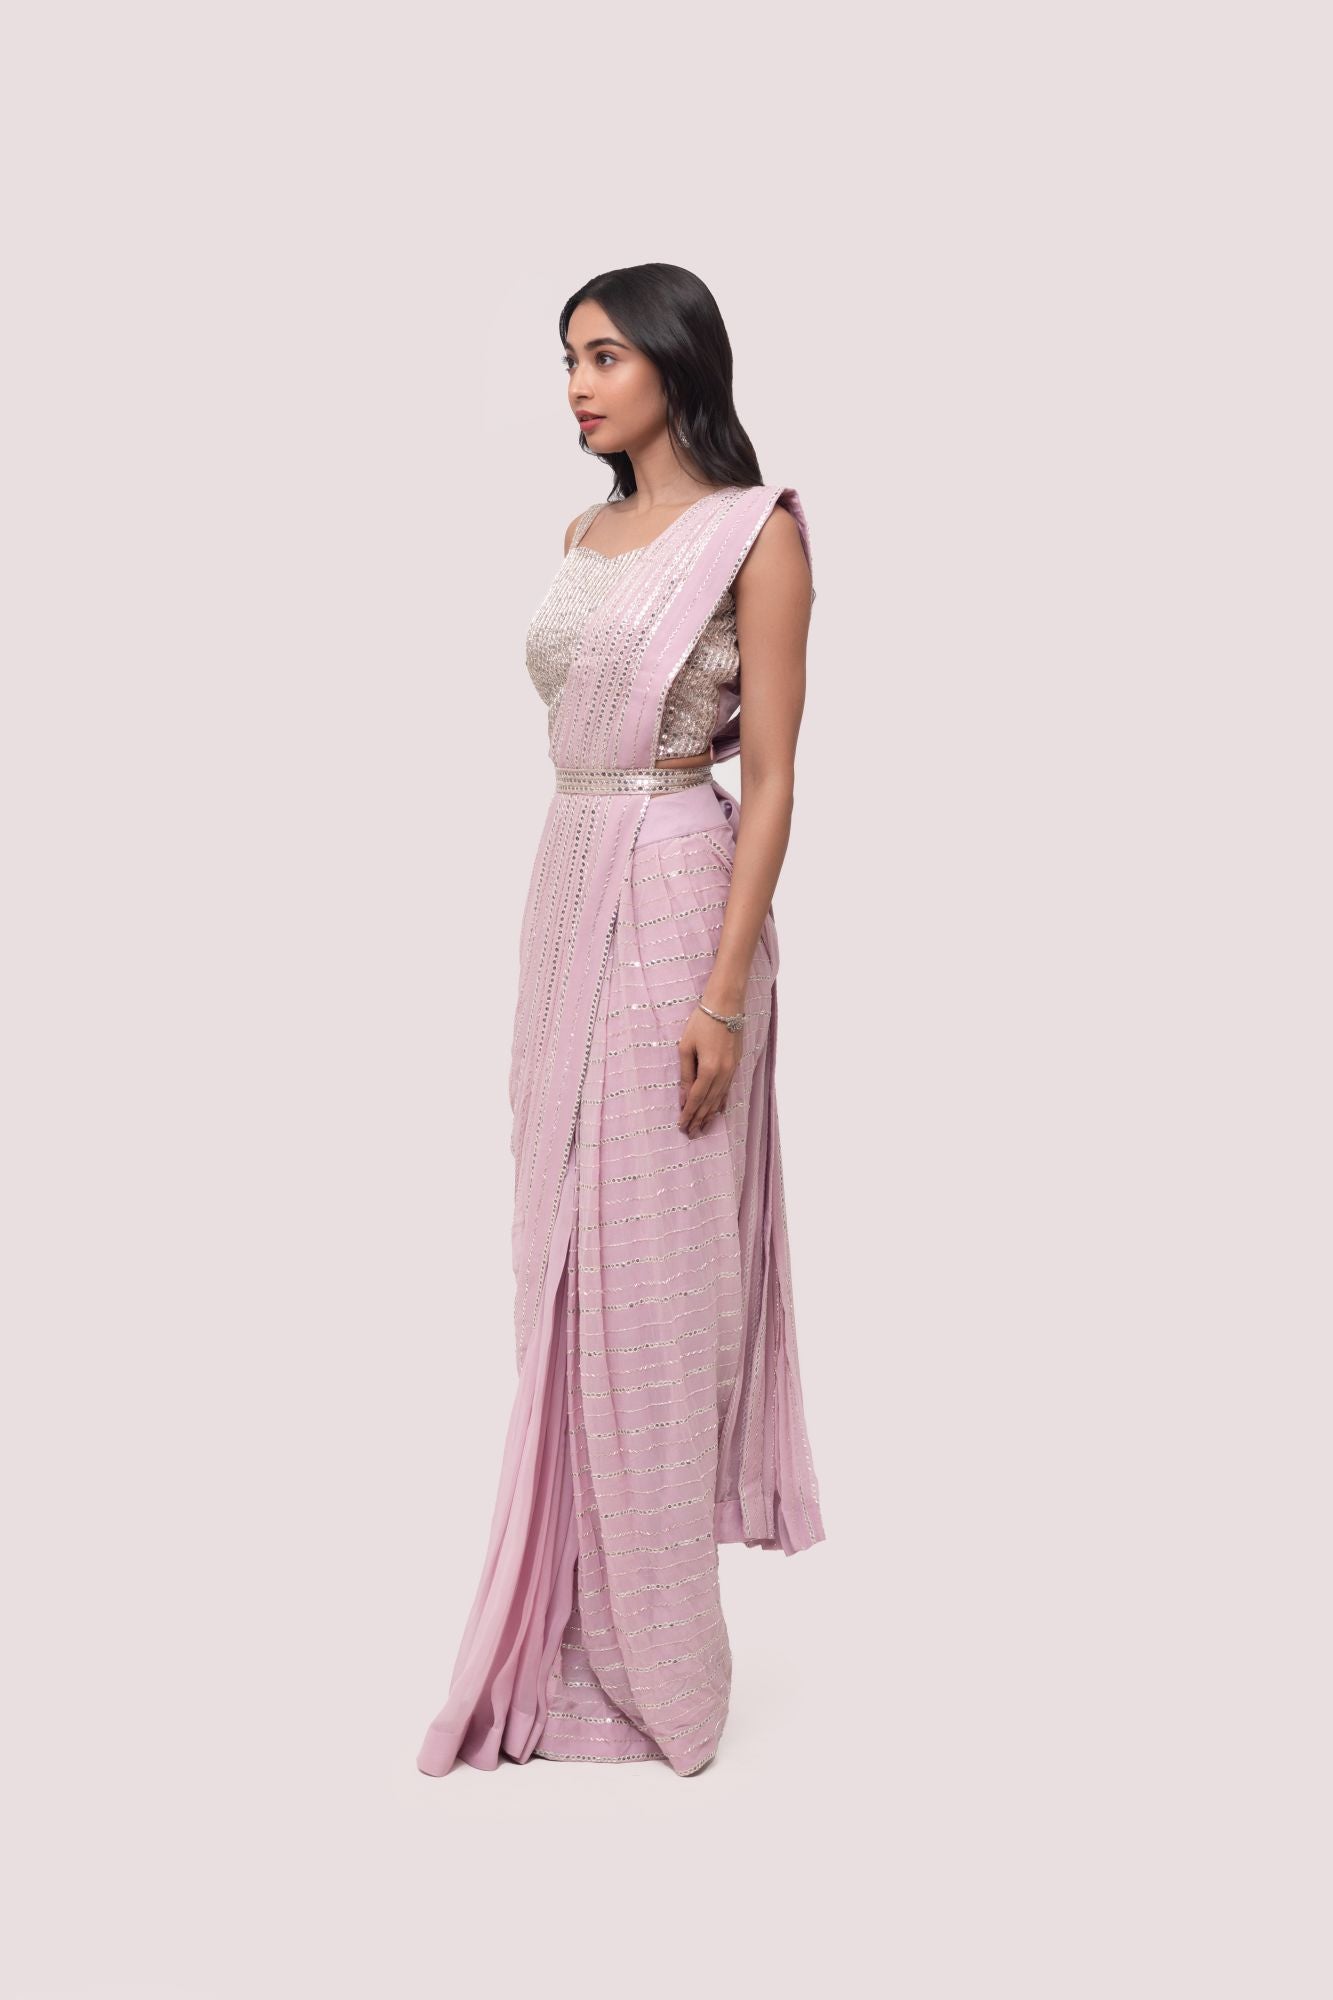 Shop the pink mirror work saree with a sleeveless blouse. Make a fashion statement on festive occasions and weddings with designer sarees, designer suits, Indian dresses, Anarkali suits, palazzo suits, designer gowns, sharara suits, and embroidered sarees from Pure Elegance Indian fashion store in the USA.